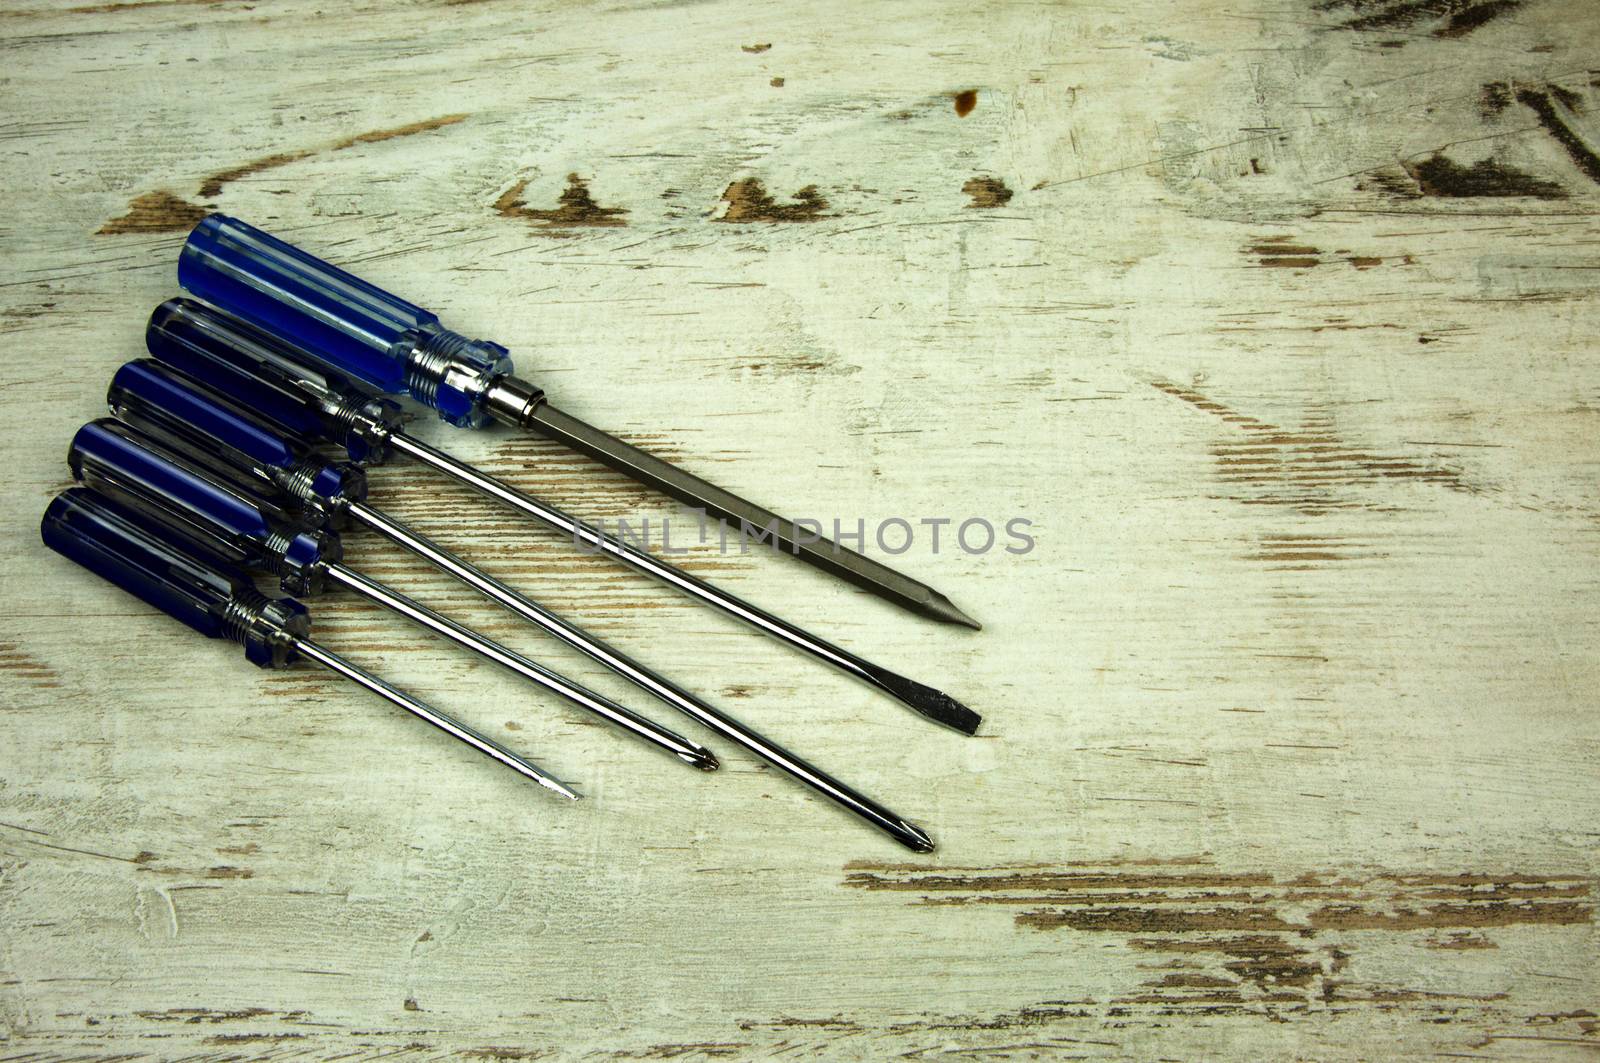 Set of screwdrivers on a wooden table by kuba61